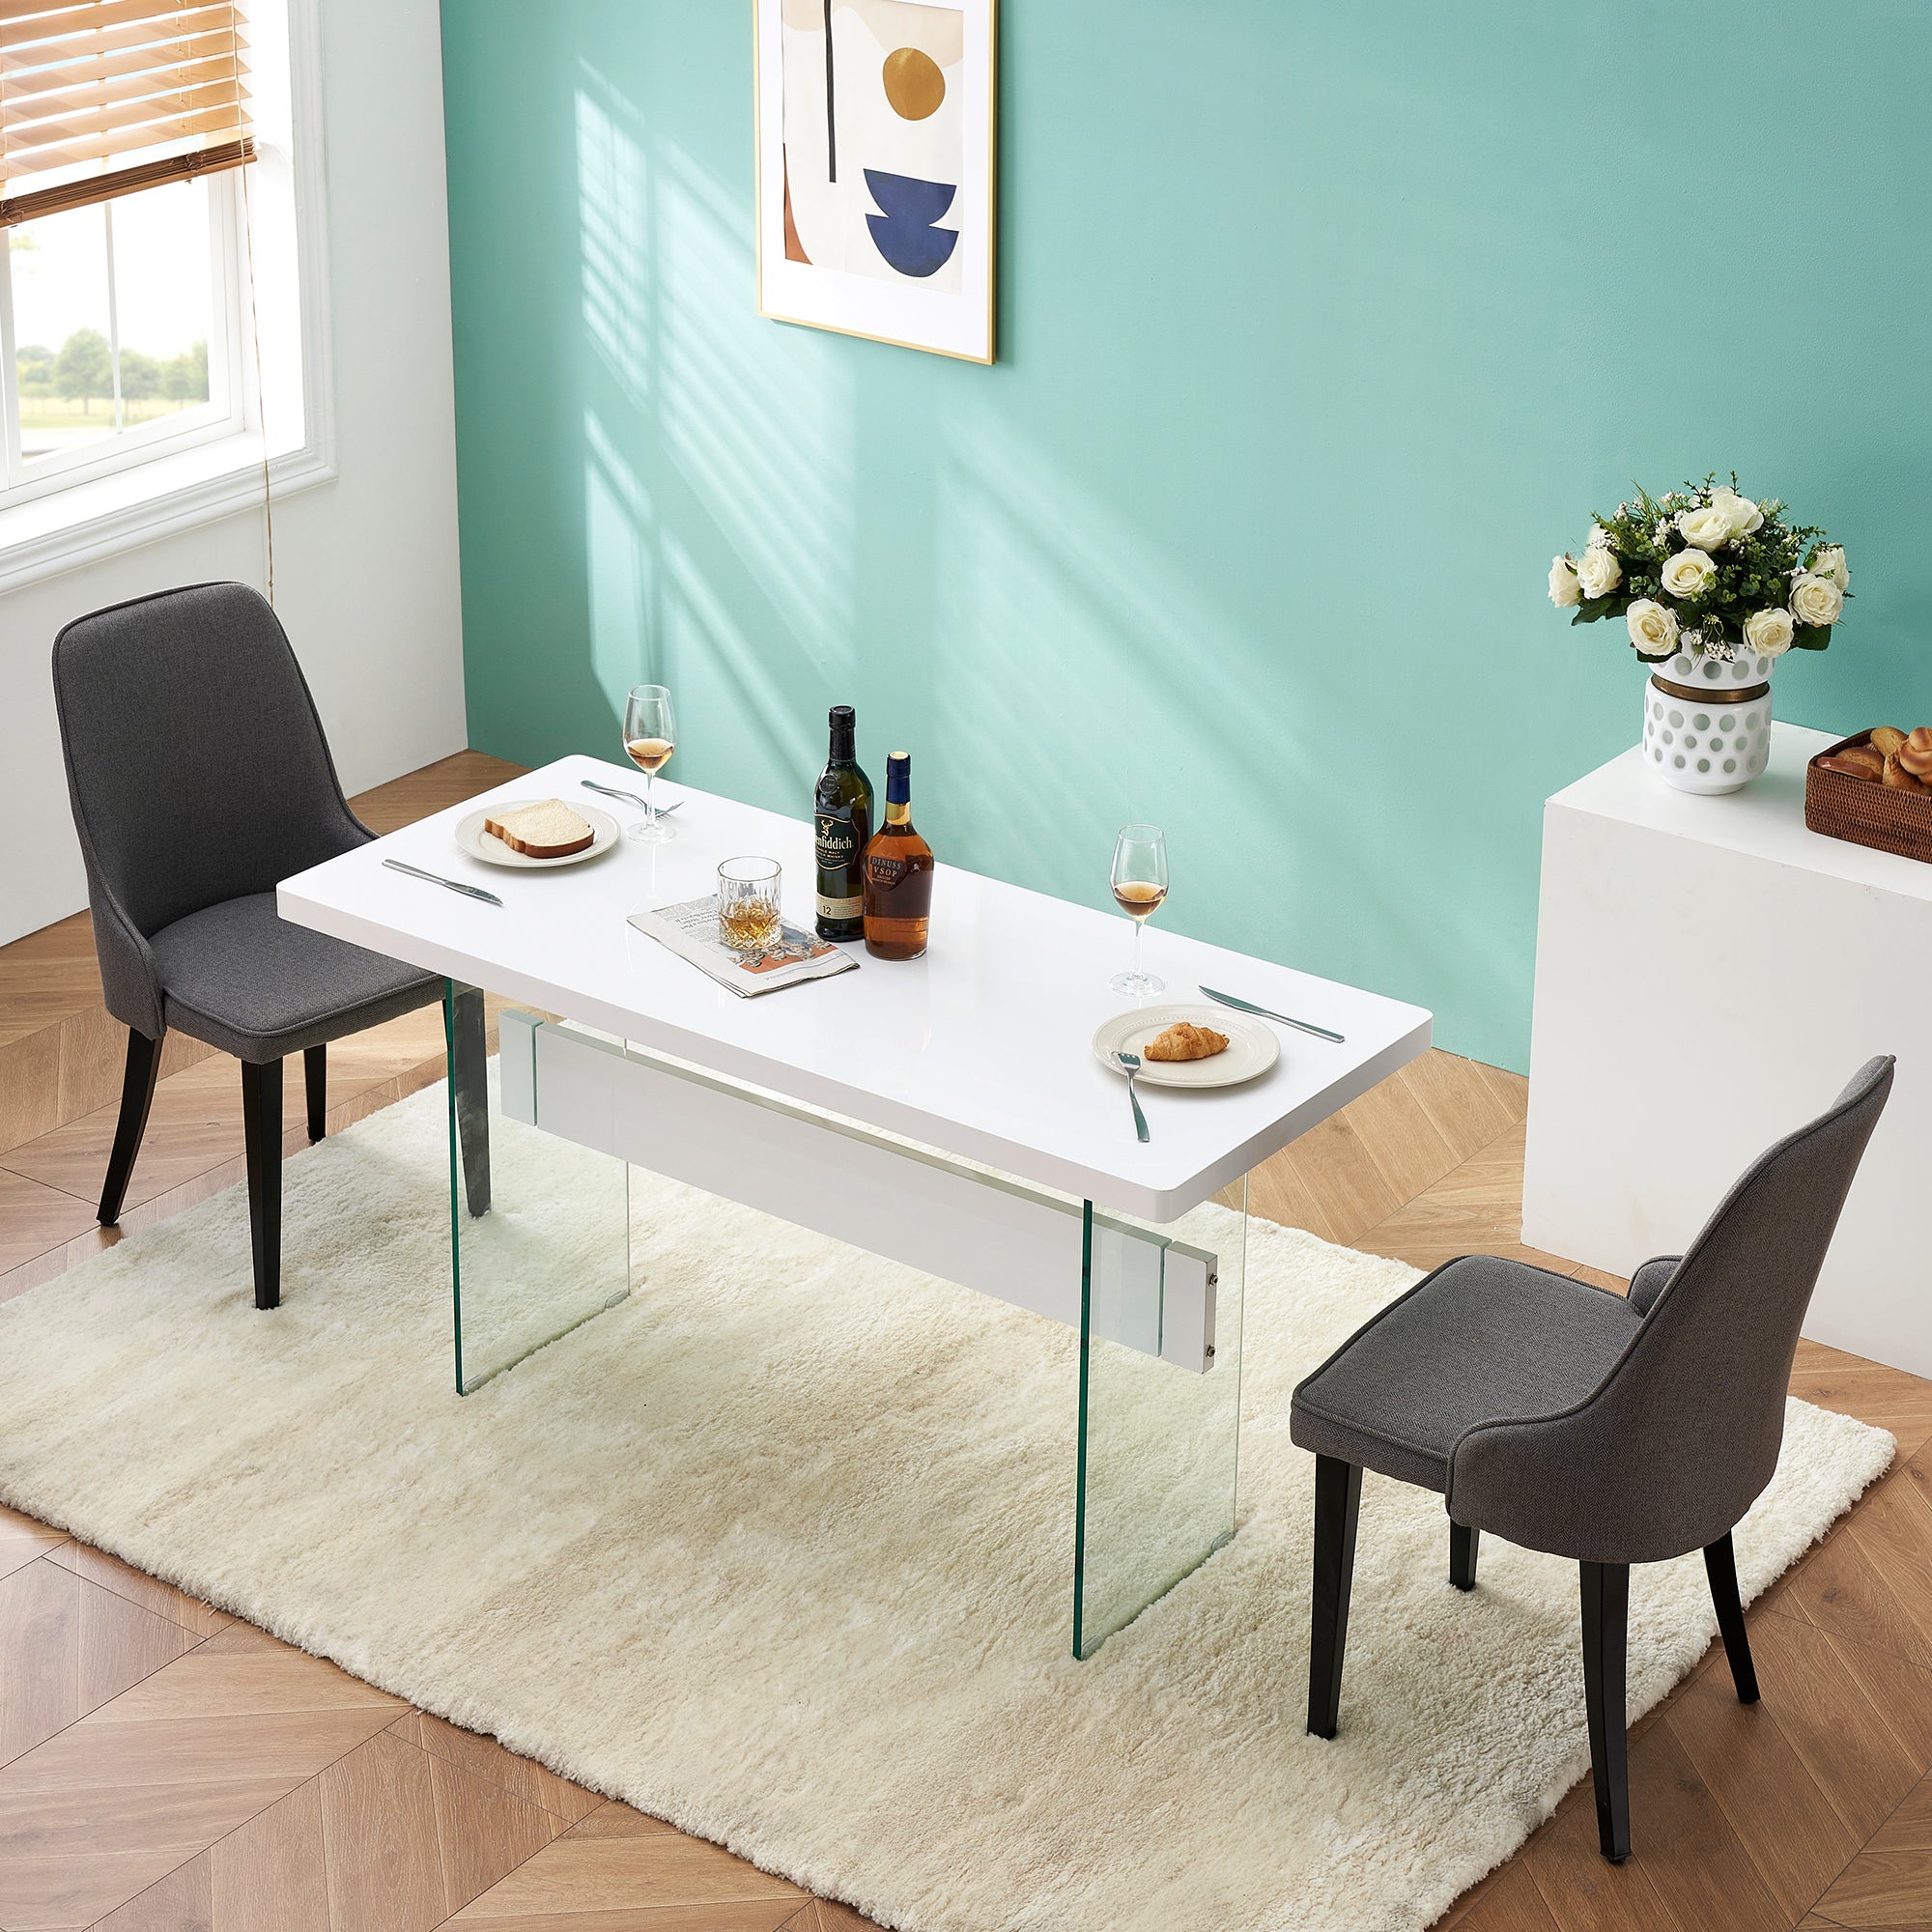 ivinta Modern White Dining Table, High Glossy Dining Room Table for 4/6